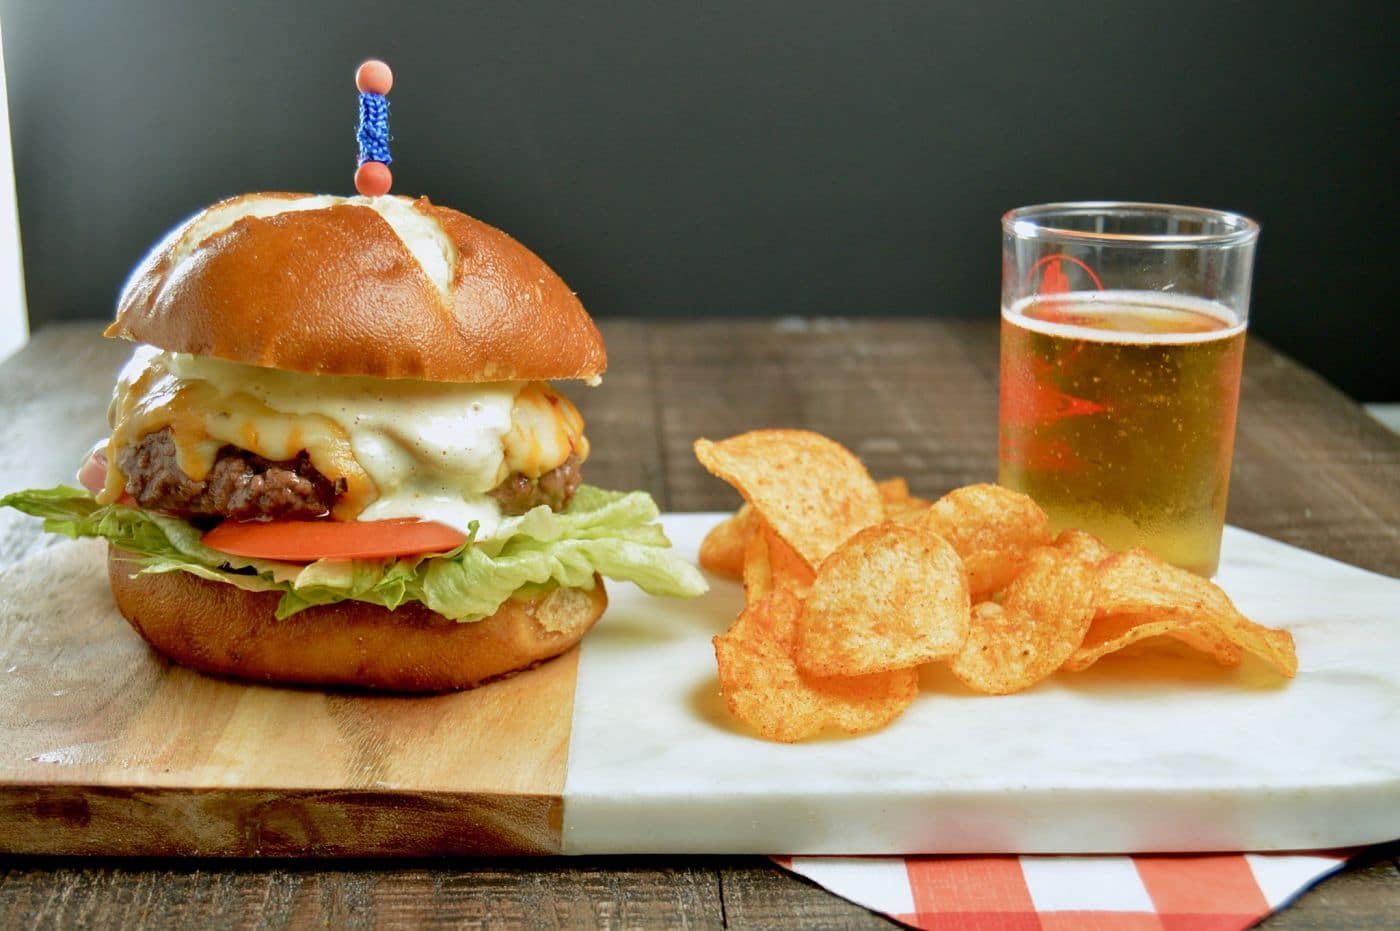 BUrger, chips and a beer on a platter